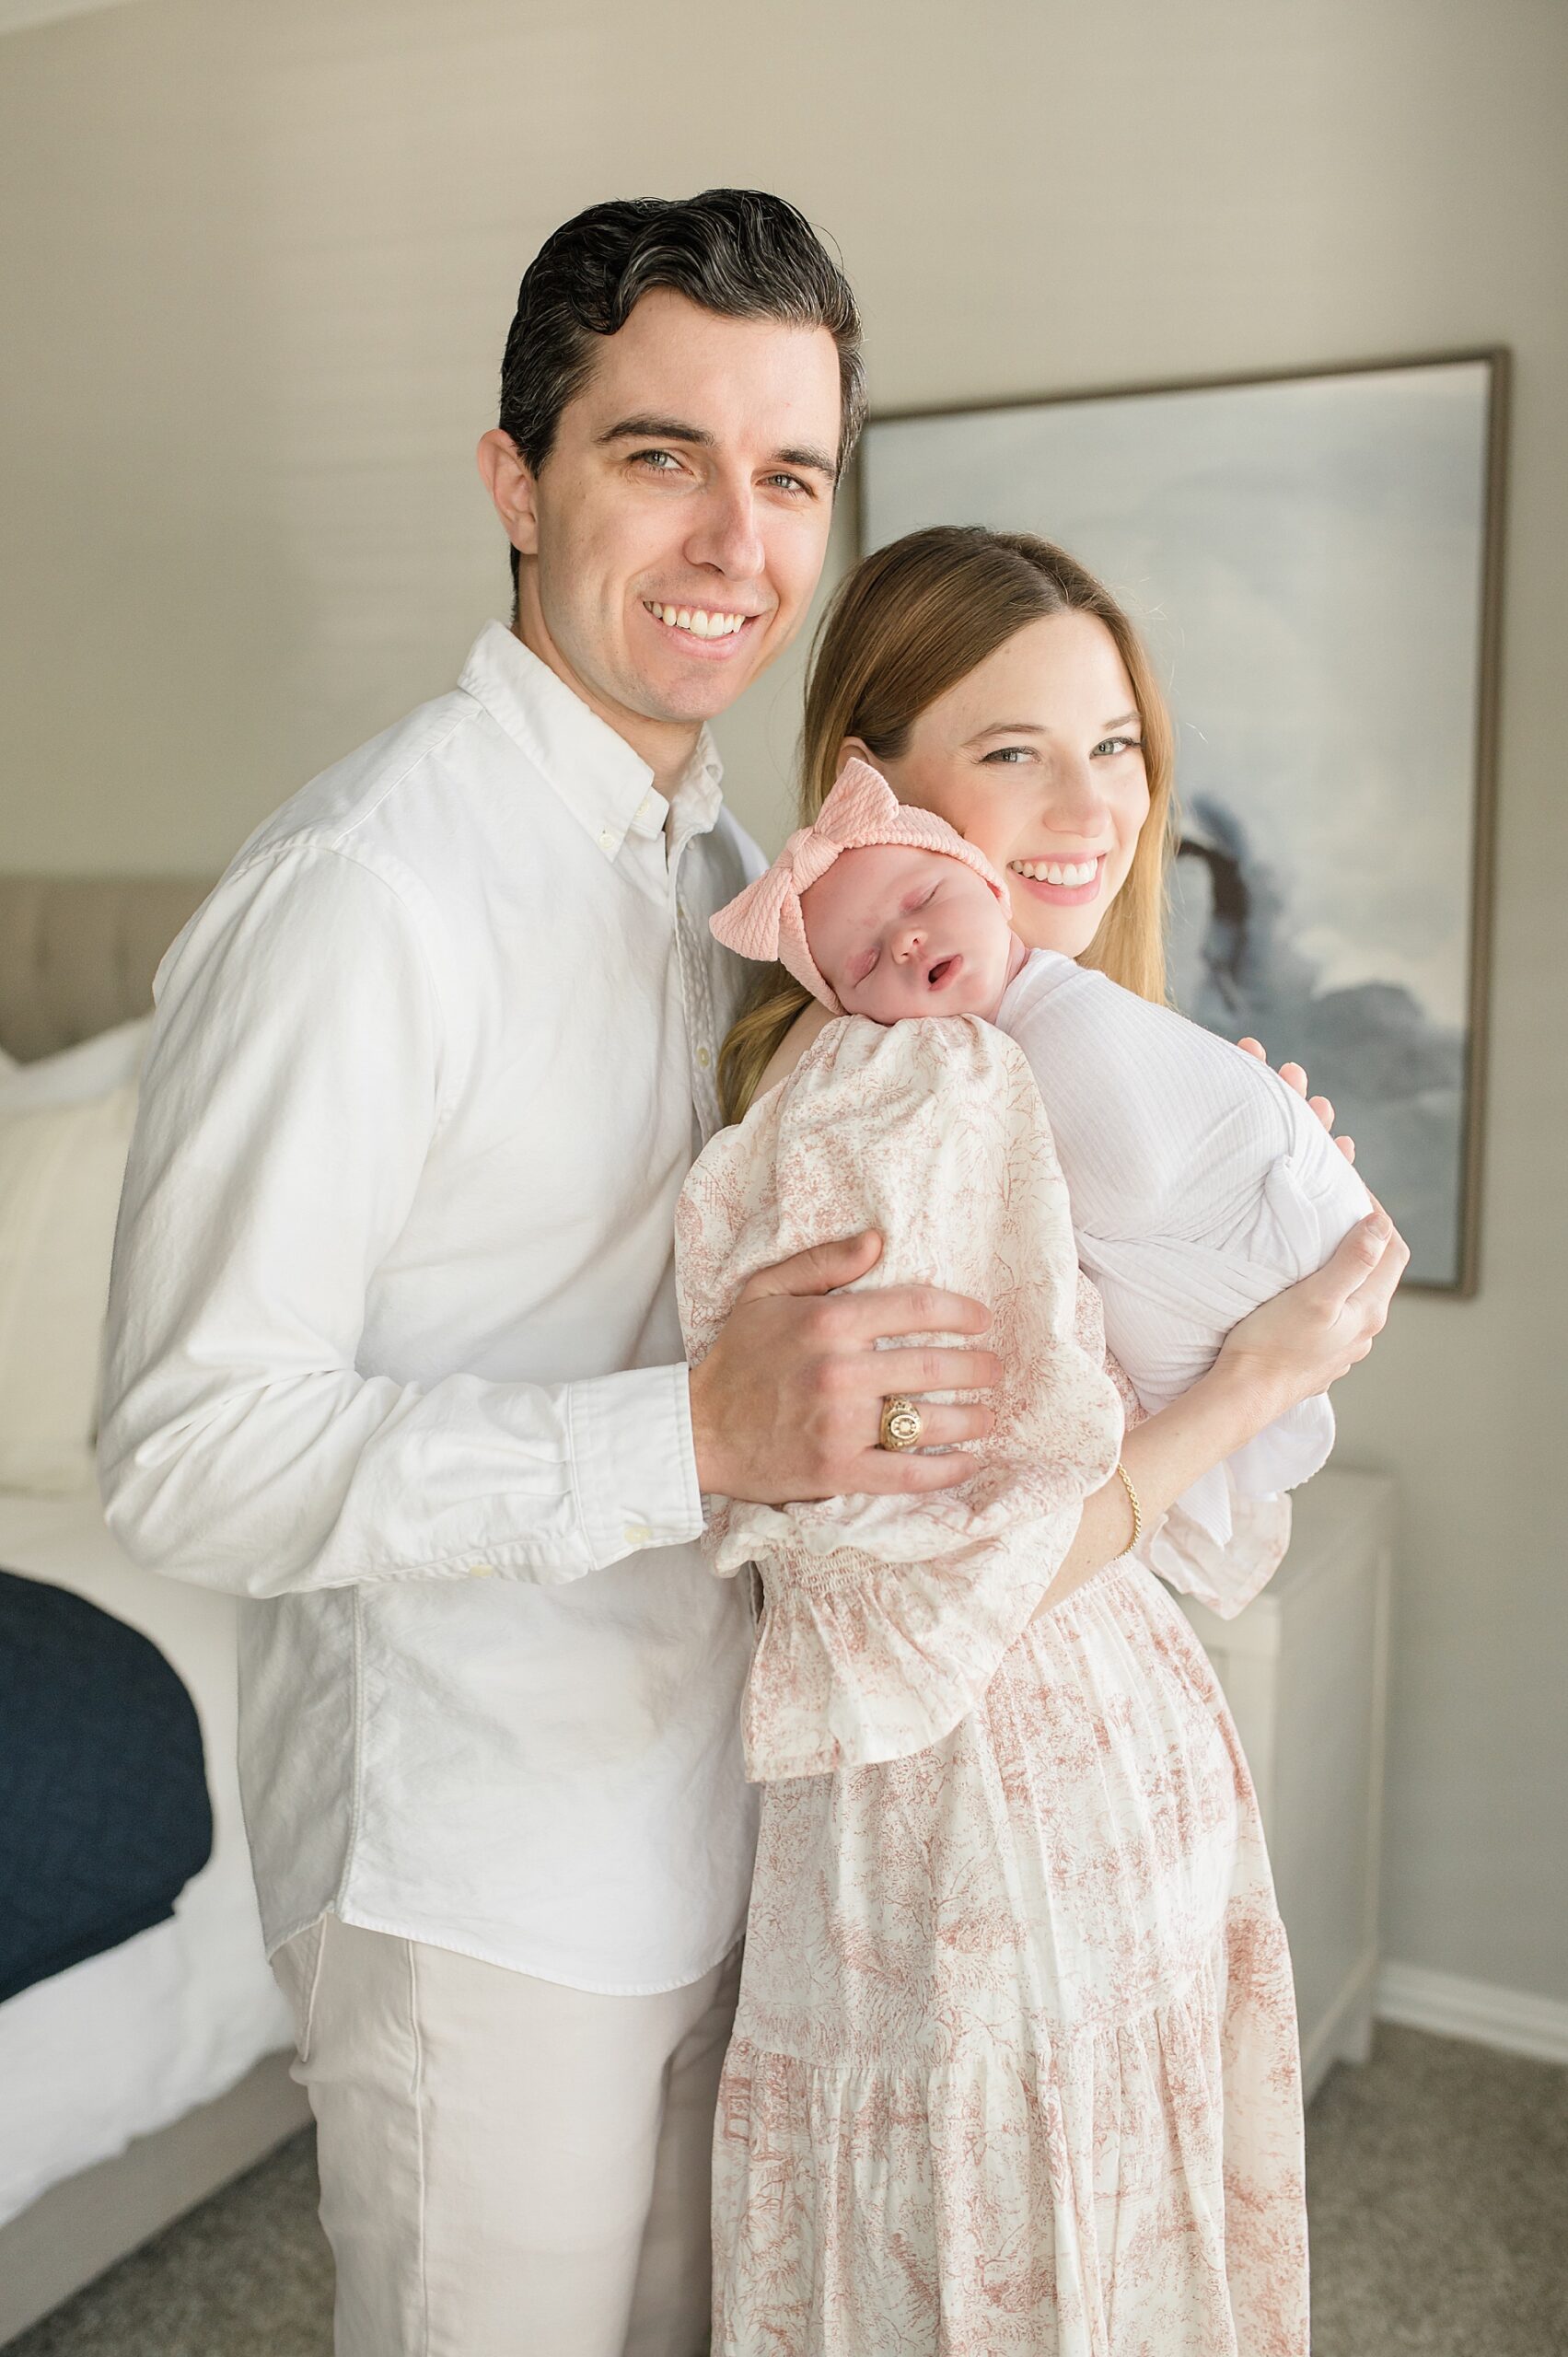 In-Home vs. Studio Newborn Sessions: which one is right for you?